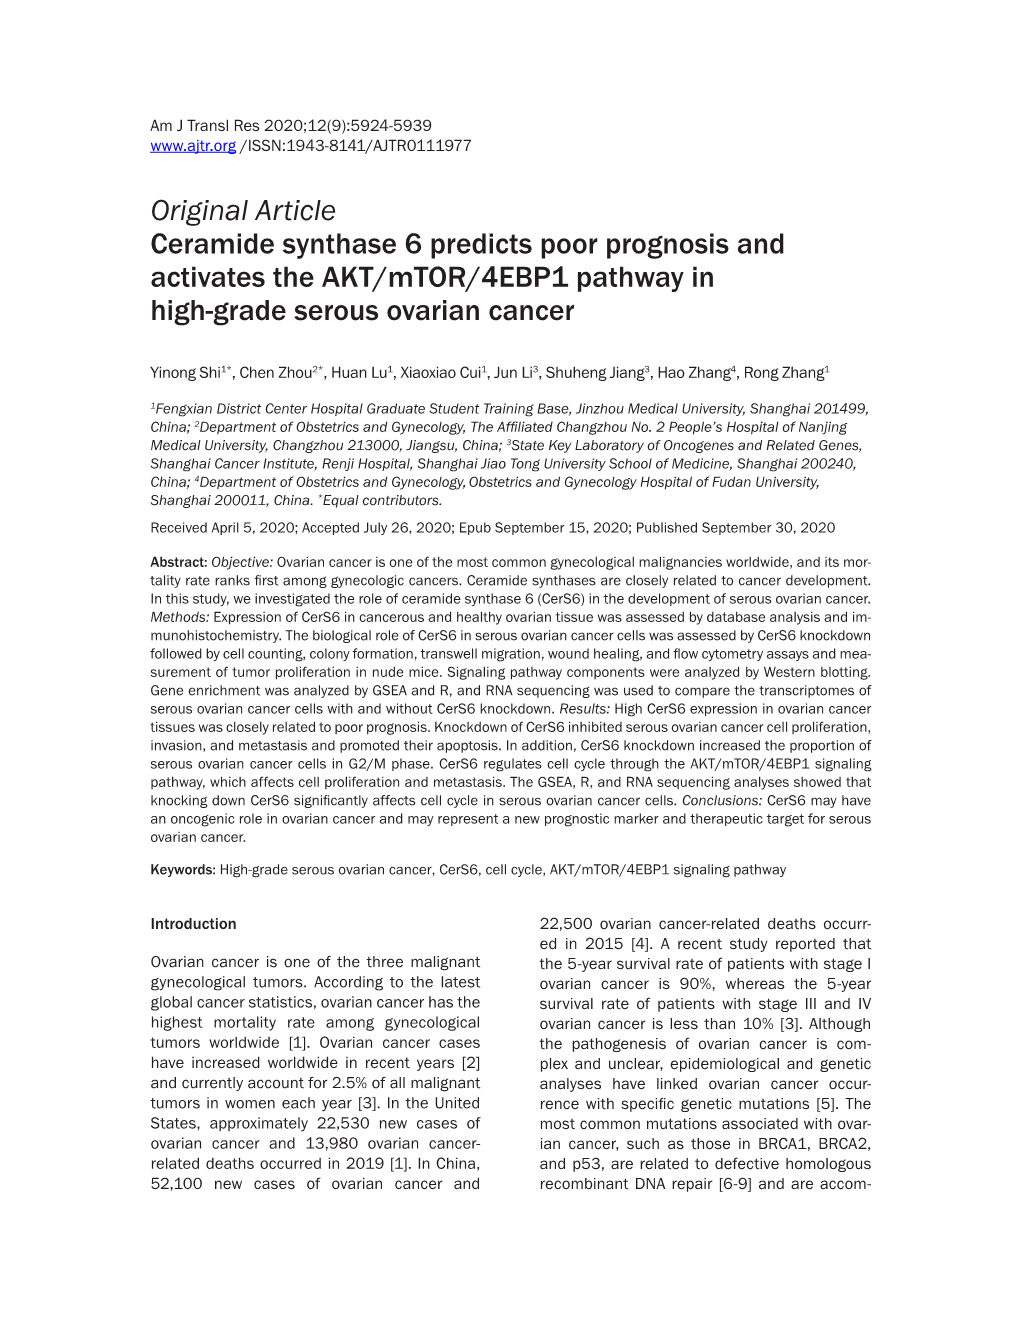 Original Article Ceramide Synthase 6 Predicts Poor Prognosis and Activates the AKT/Mtor/4EBP1 Pathway in High-Grade Serous Ovarian Cancer